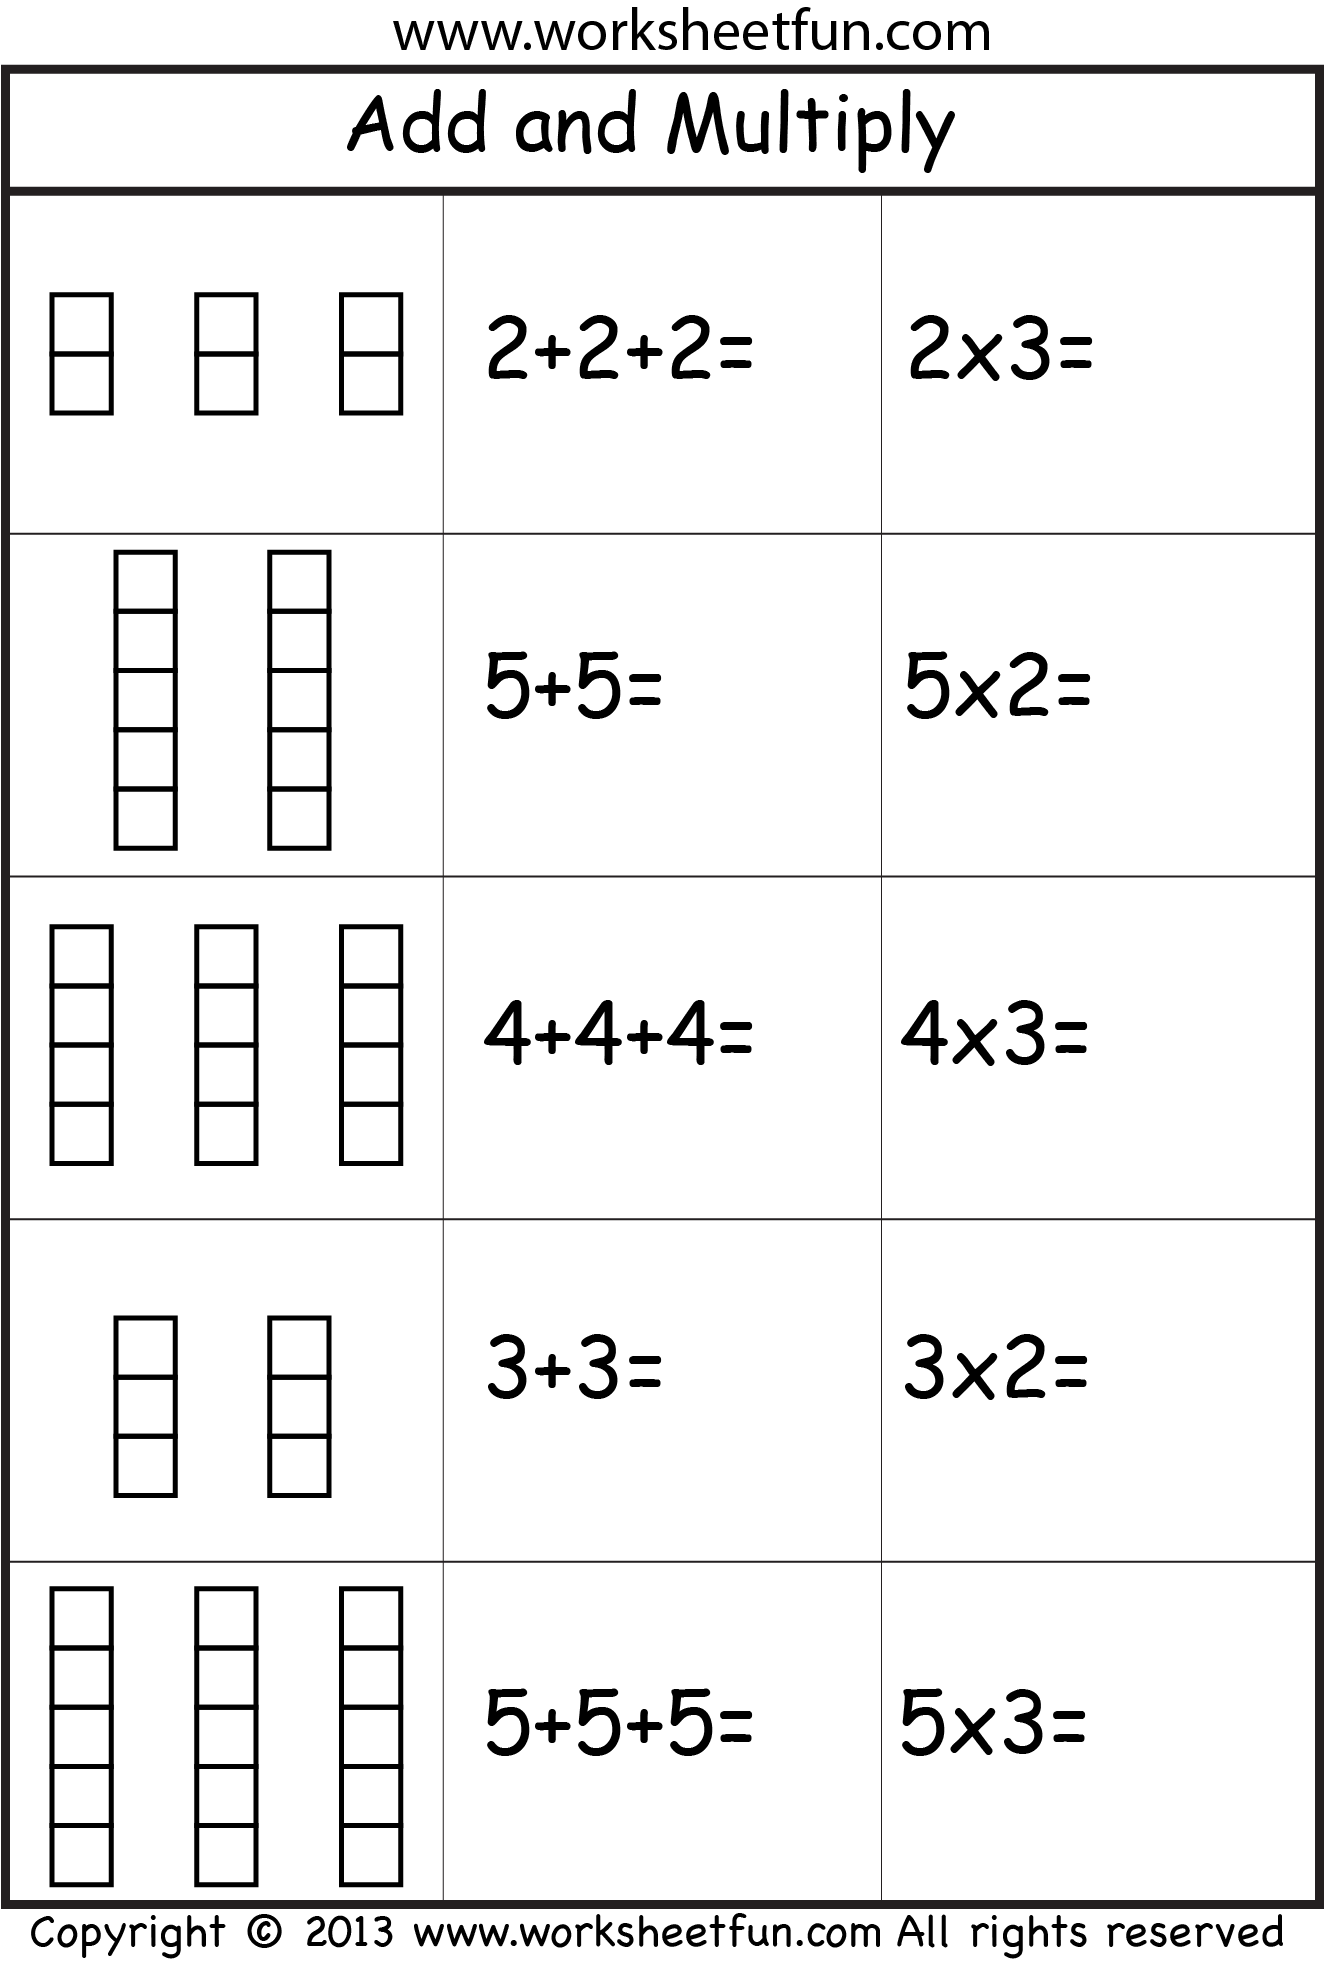 Addition And Multiplication Counting Principles Worksheet